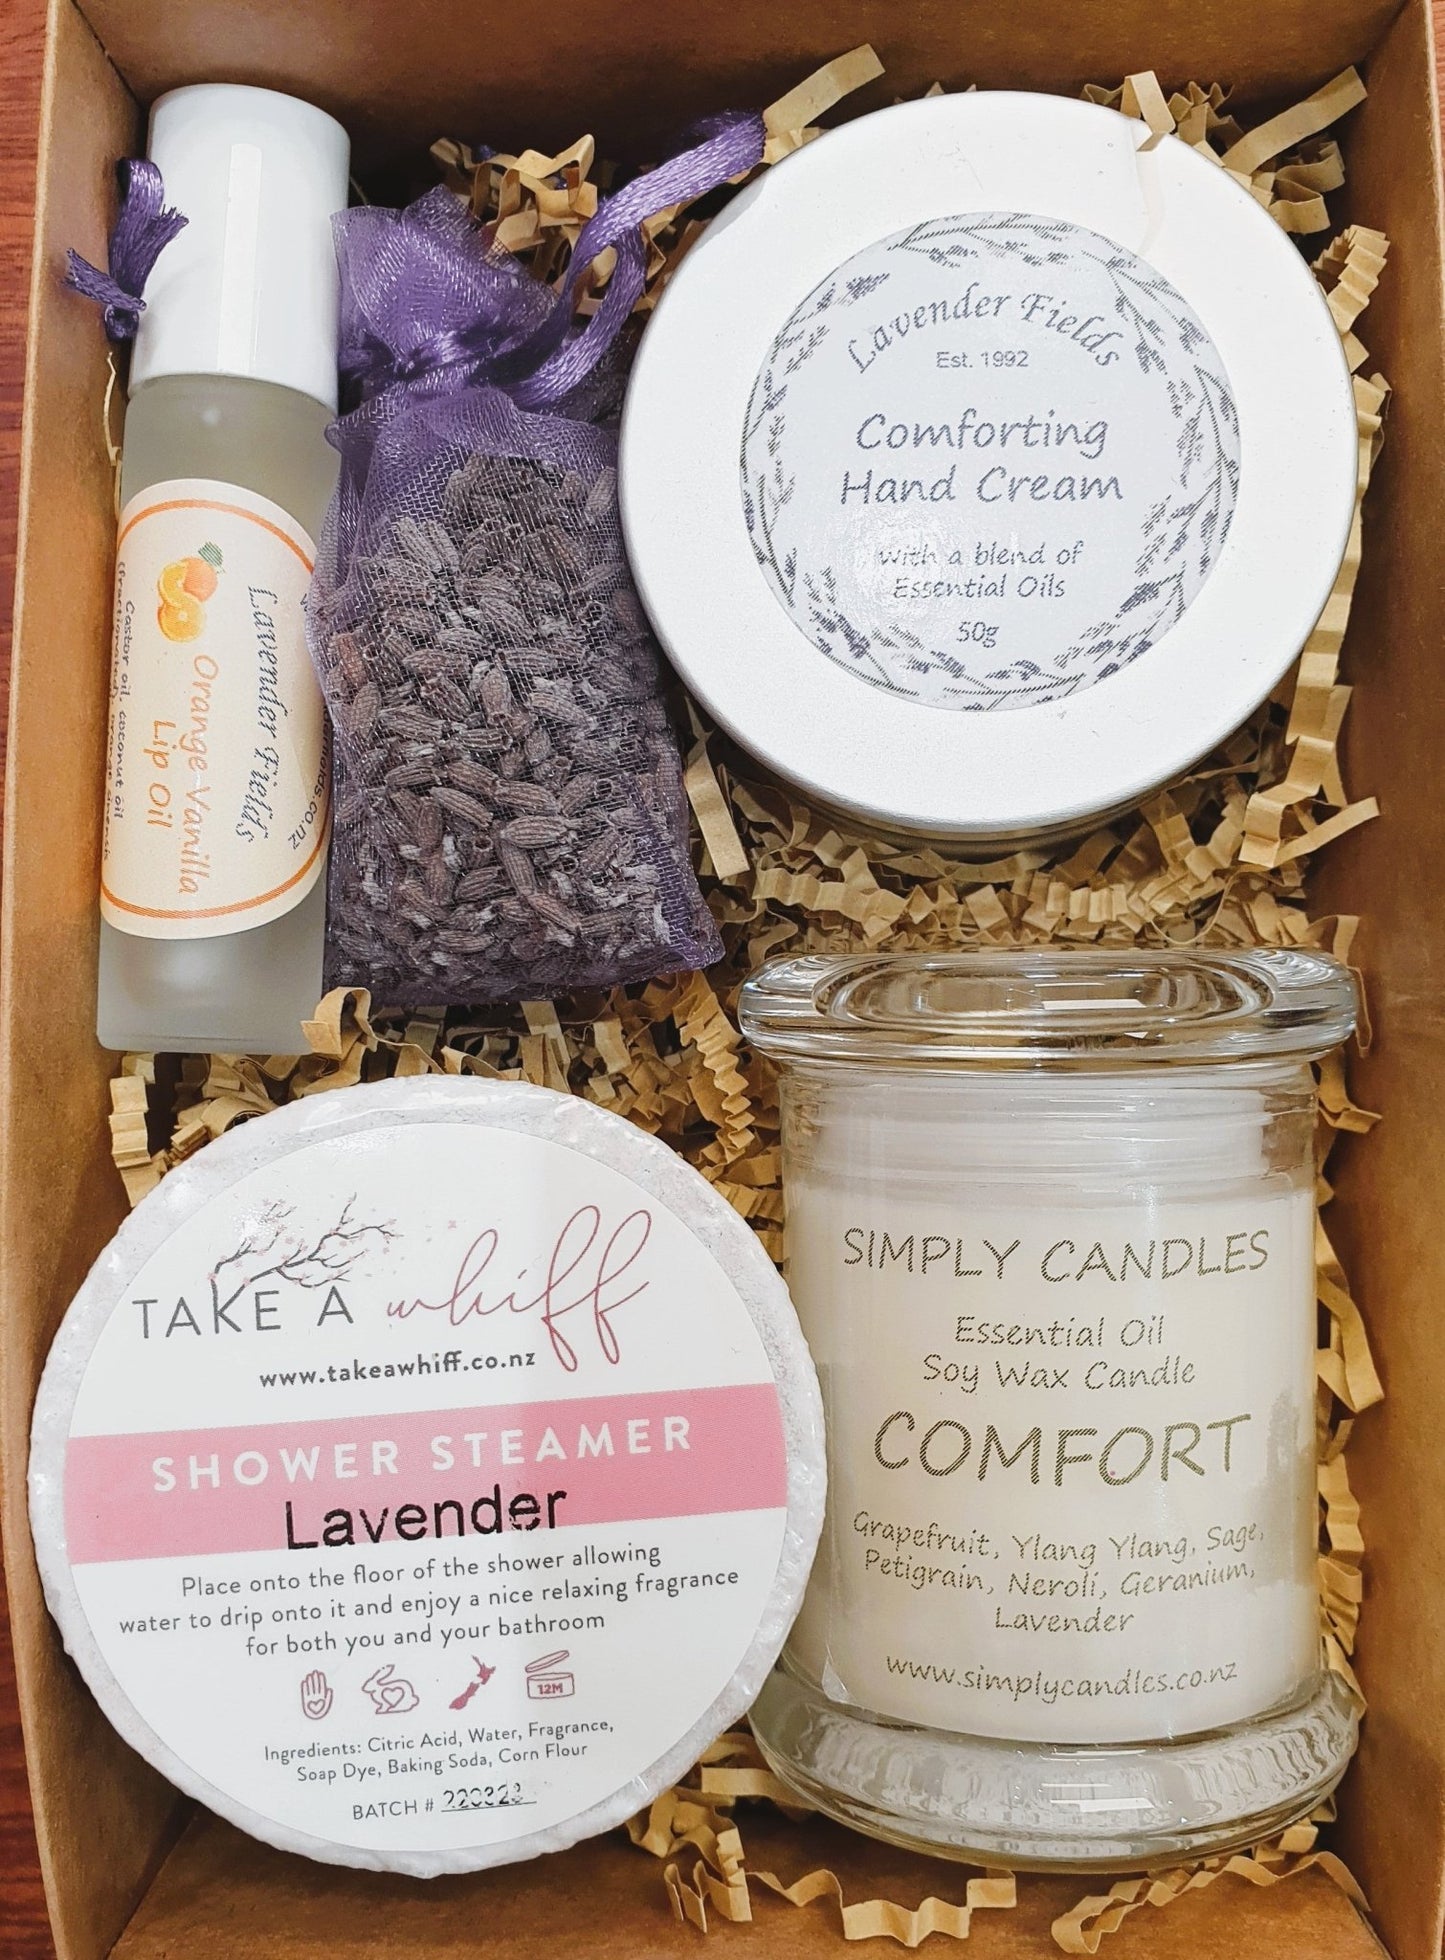 Comfort gifts - Simply Candles